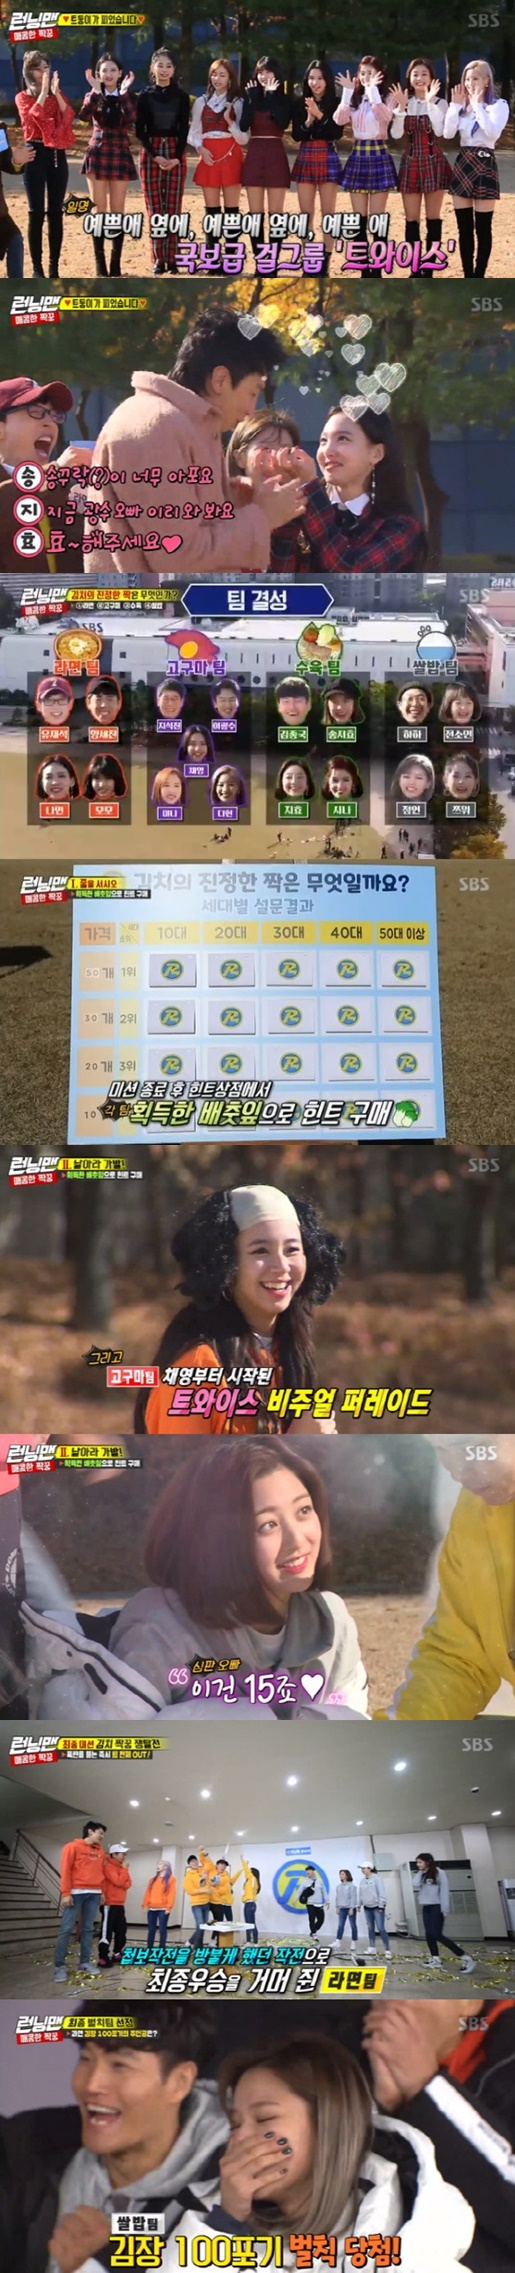 <p>Viewership survey Agency Nielsen Korea, according to the last 2 days of the broadcast of ‘Running Man’is the main advertising officials of the important indicators here are age 20-49 years (‘2049’) target audience 4. 5%(NCR, furniture, Part 2 viewership standard)record for the same time period, 1 ranked. Average viewership is part 1 of 5. 3%, Part 2 7. 7%(the NCR furniture viewership standards)was, per minute, with a maximum application rate of 8. Up to 8% jumped.</p><p>The kimchis true mate, find Kim most distinctive ‘spicy paired peek-a-Boo’ lace decorated in the ‘Running Man’ sister group TWICE home and by members of the acclaimed shorter.</p><p>This race is a team competition with a view as if the team is Yoo Jae-Suk, Yang and more as well, Momo, I smoke, and every team in the Suk Jin, Lee Kwang-soo, Chae, Mina, Implementation, Training, Team Kim Jong Kook, Song JI Hyo,, Hyo, Rice team in that one, small, square, Richardson sub divided into.</p><p>Each team has a ‘line’ through the game fierce confrontation unfolded, the team, the academic team, and each team, each 1 win by handing out the hints acquired, and Round 2 of the ‘fly! The wig-switching in the potato team and if the team is 1 for, 2 for to or once the hint is acquired.</p><p>The last final round that the menu is attached to the name tag off of the menu when you exchange, while a bomb attached to the name tags off team the power is out, and the menu until the opponent beyond the ‘Star race’began.</p><p>Ago min is Lee Kwang-soos name tag off, but Lee Kwang-soo is a bomb, this Rice team is the power being out face. Water and water our father, and our exchange in La, teams info to start up, expand, and ‘kimchis true even’exclaim the headquarters seat and headed towards, training, team support available to the team or the name of the tag off as when I smoke “then”and cry victory.</p><p>Meanwhile, Kim 100 give Driving Cycle penalty for the uncle in the game Rice team of the square ‘shit son’, born and penalties in winning was and this scene is up to 8. 8%jump in the ‘best 1 minute’.</p><p>Photos│SBS broadcast screen capture</p>